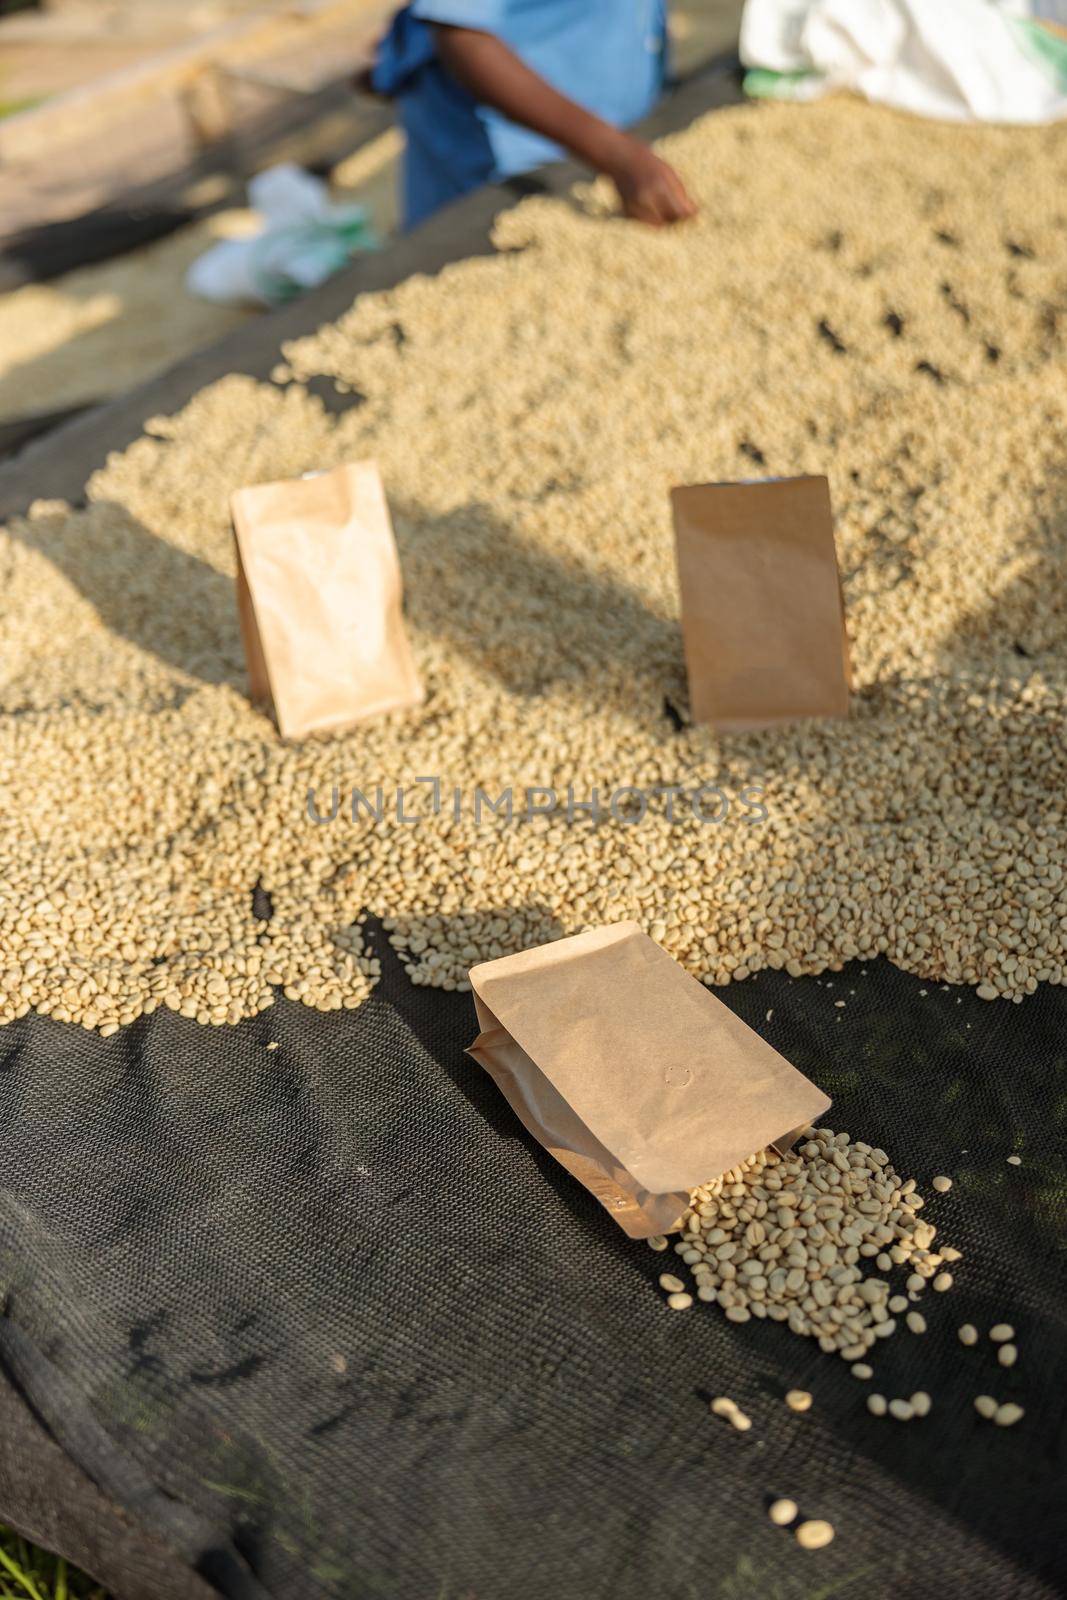 Top view of paper bags with coffee located on the tables at the coffee washing station